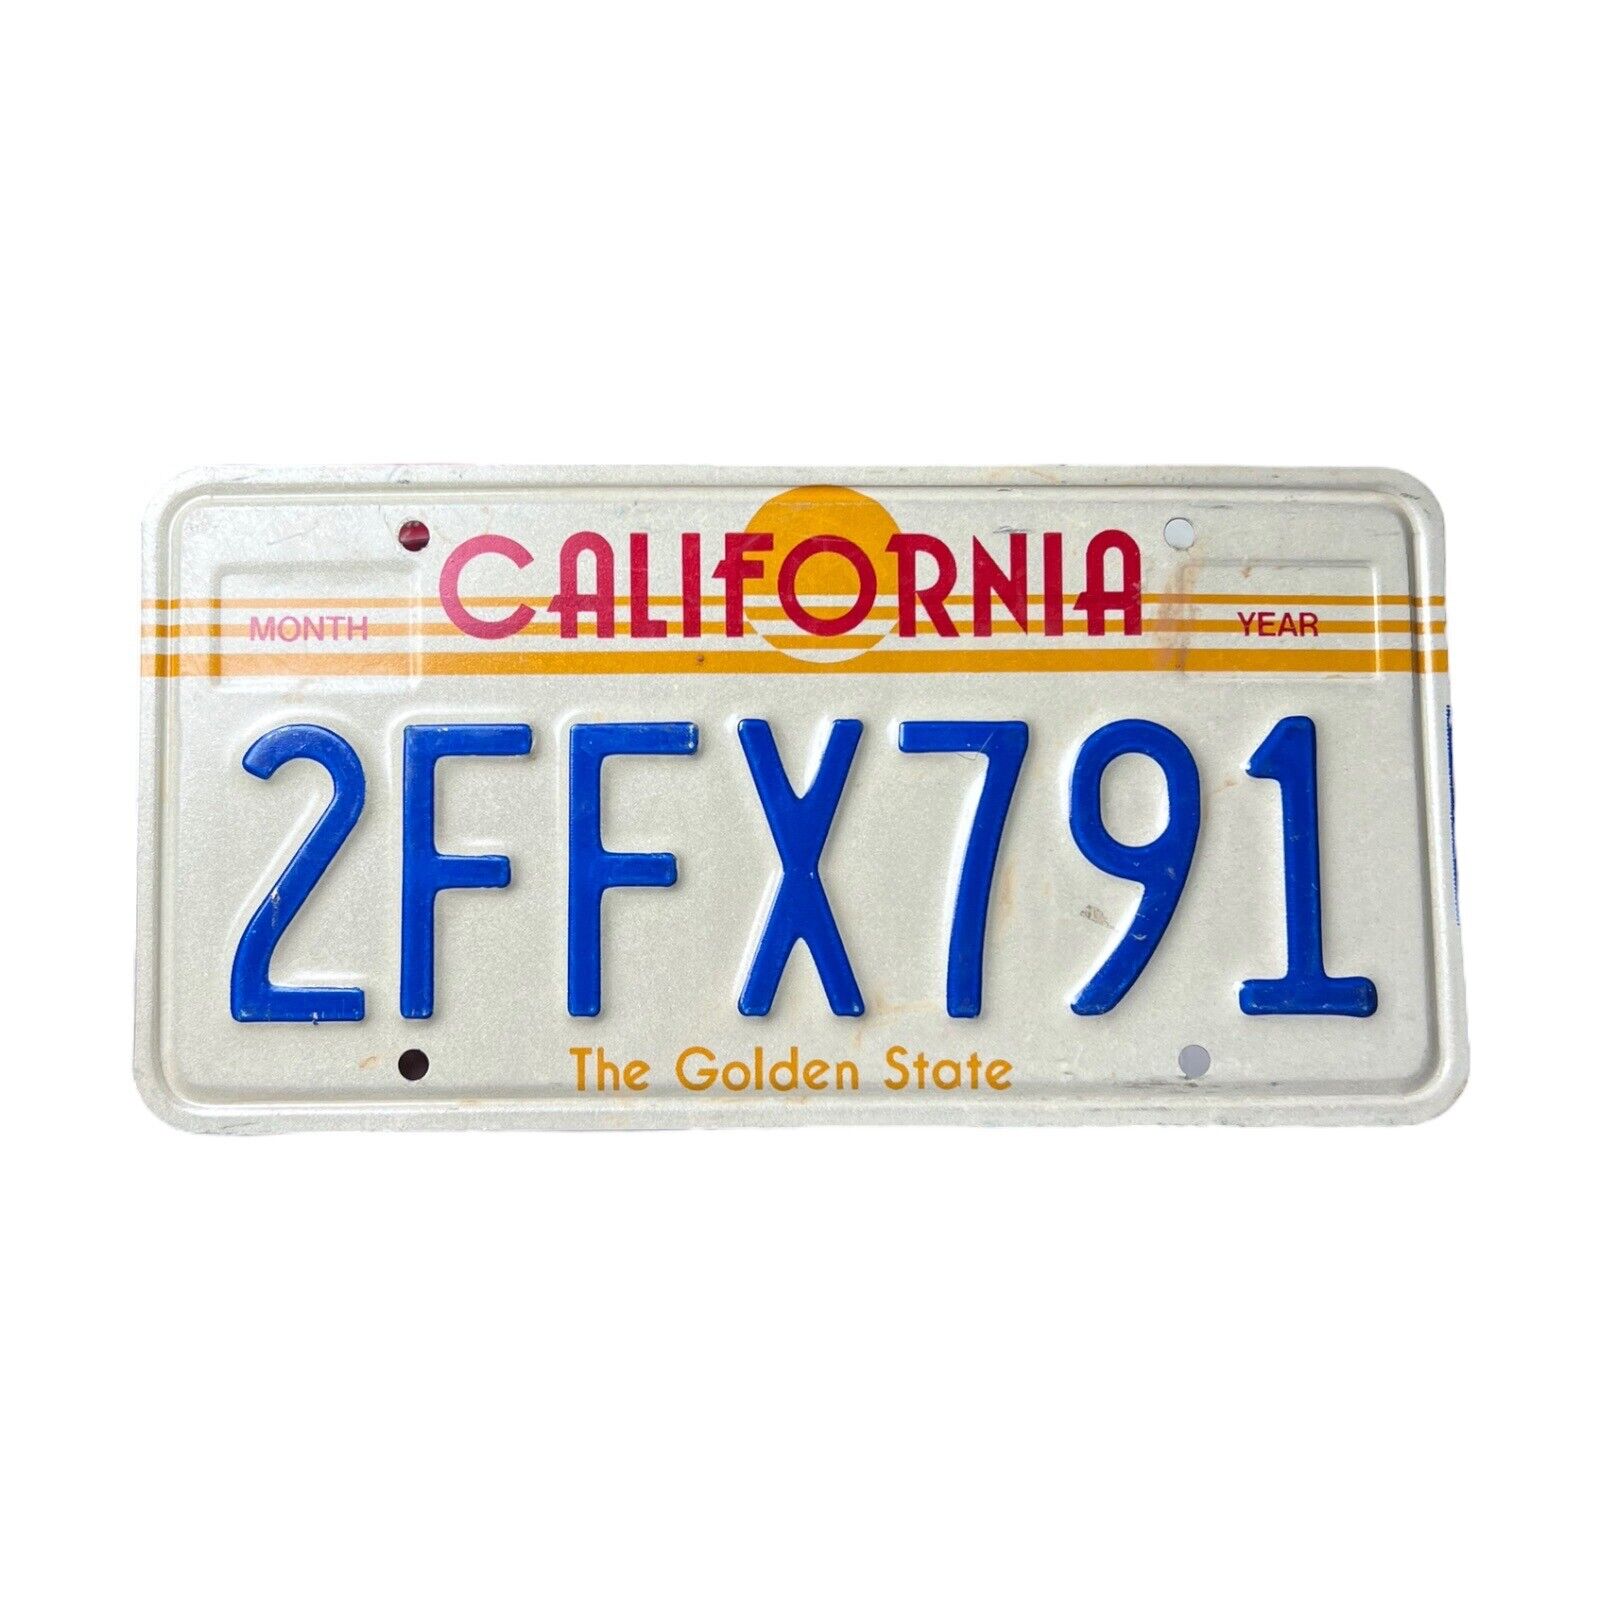 California The Golden State Vintage License Plate #2FFX791 (Expired Plate)